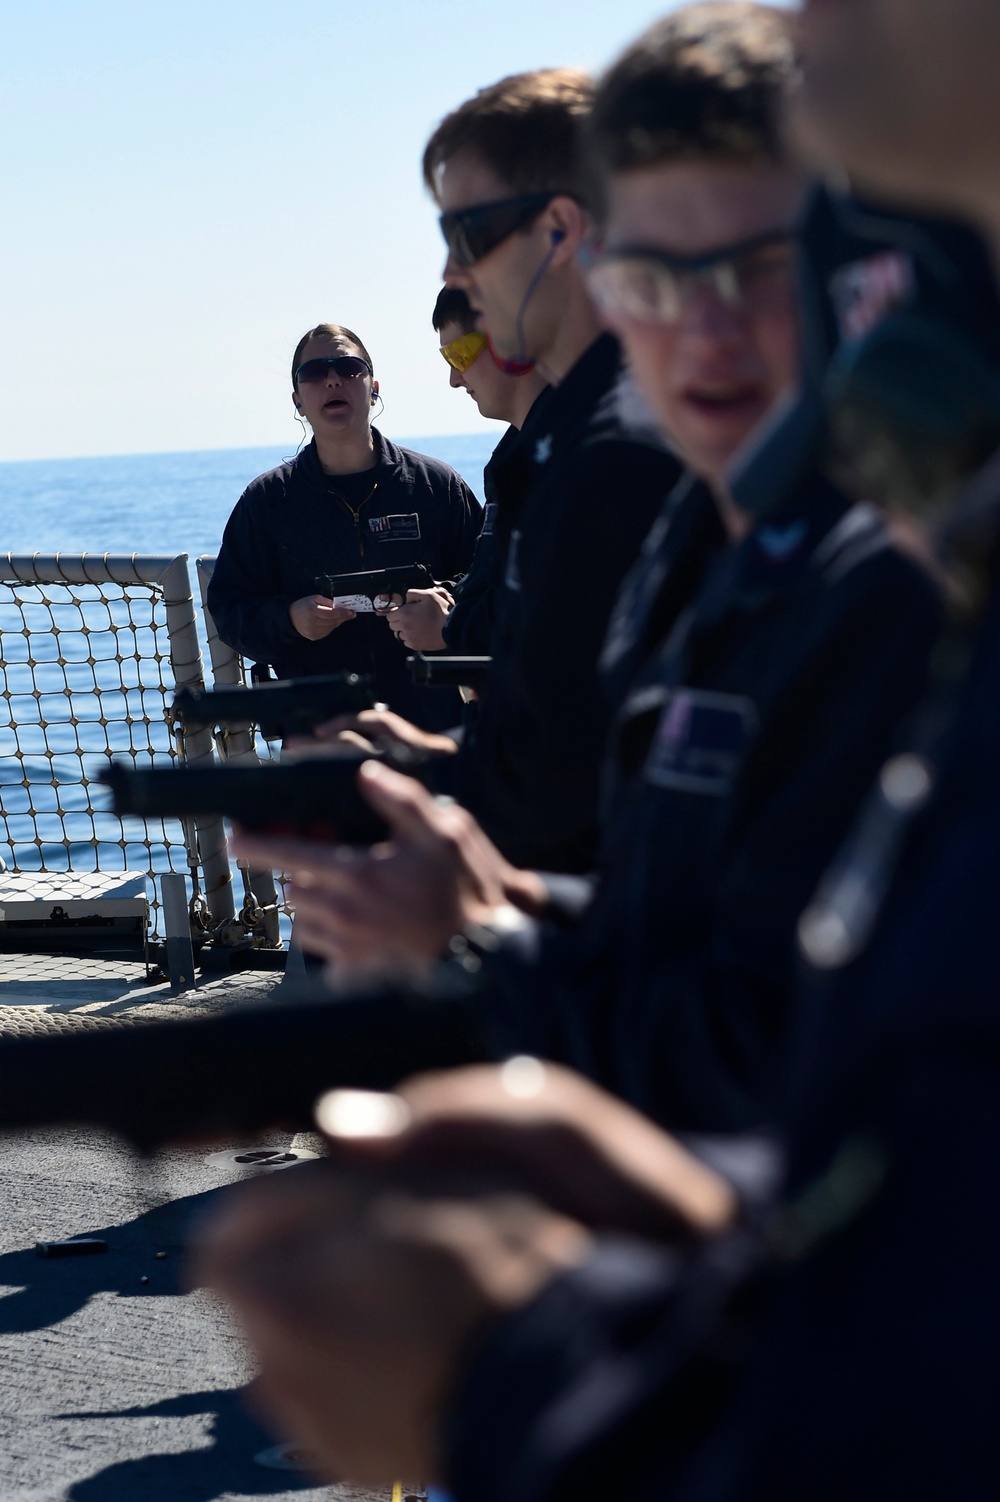 Small-arms qualification aboard USS Carney